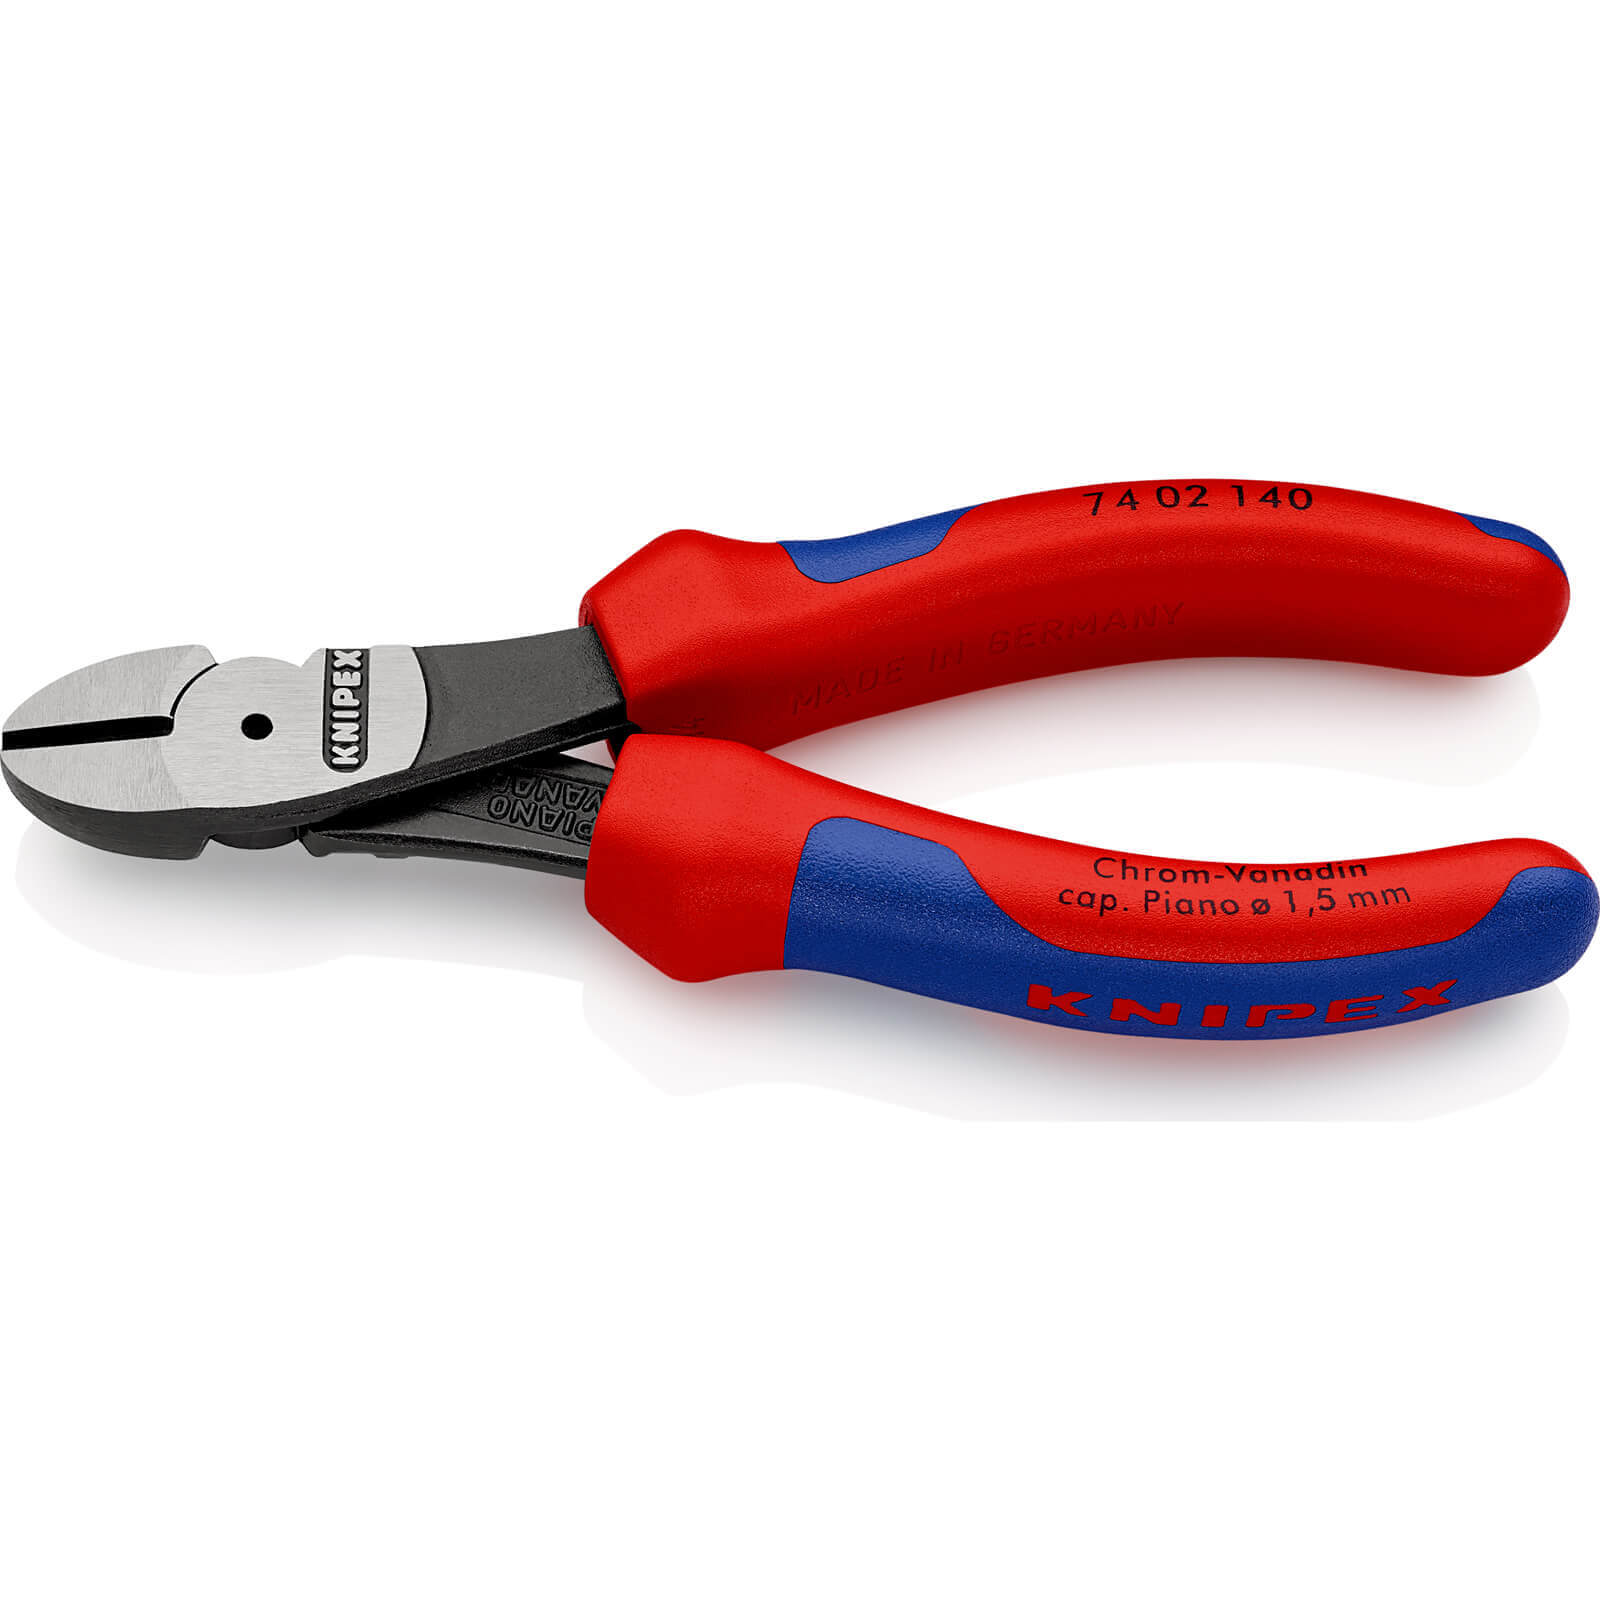 Photo of Knipex 74 02 Diagonal Cutting Pliers 140mm